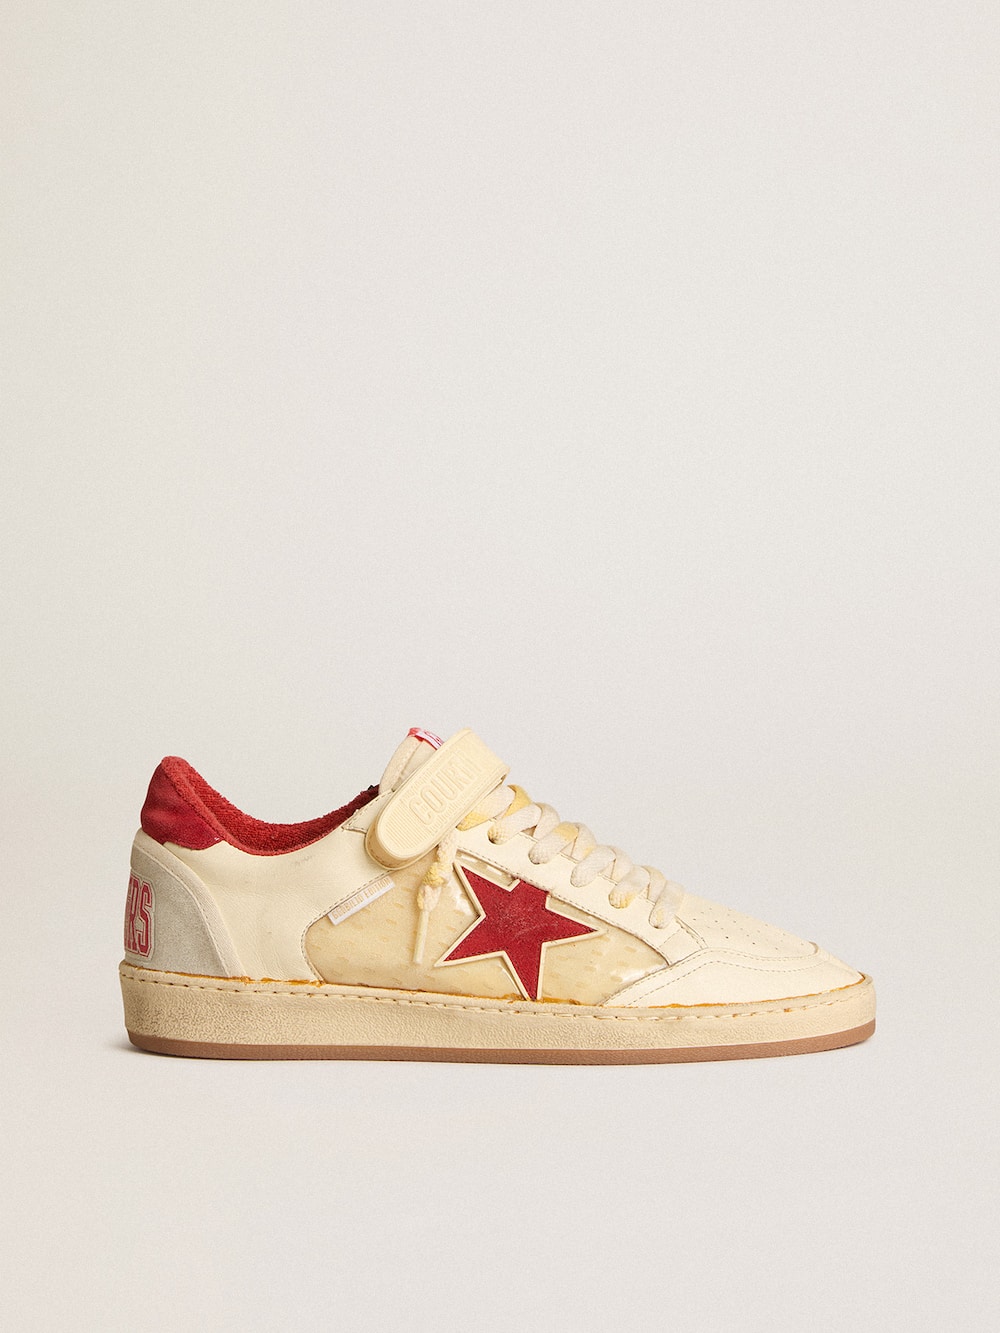 Golden Goose - Men’s Ball Star LAB in nappa and PVC with red suede star and heel tab in 